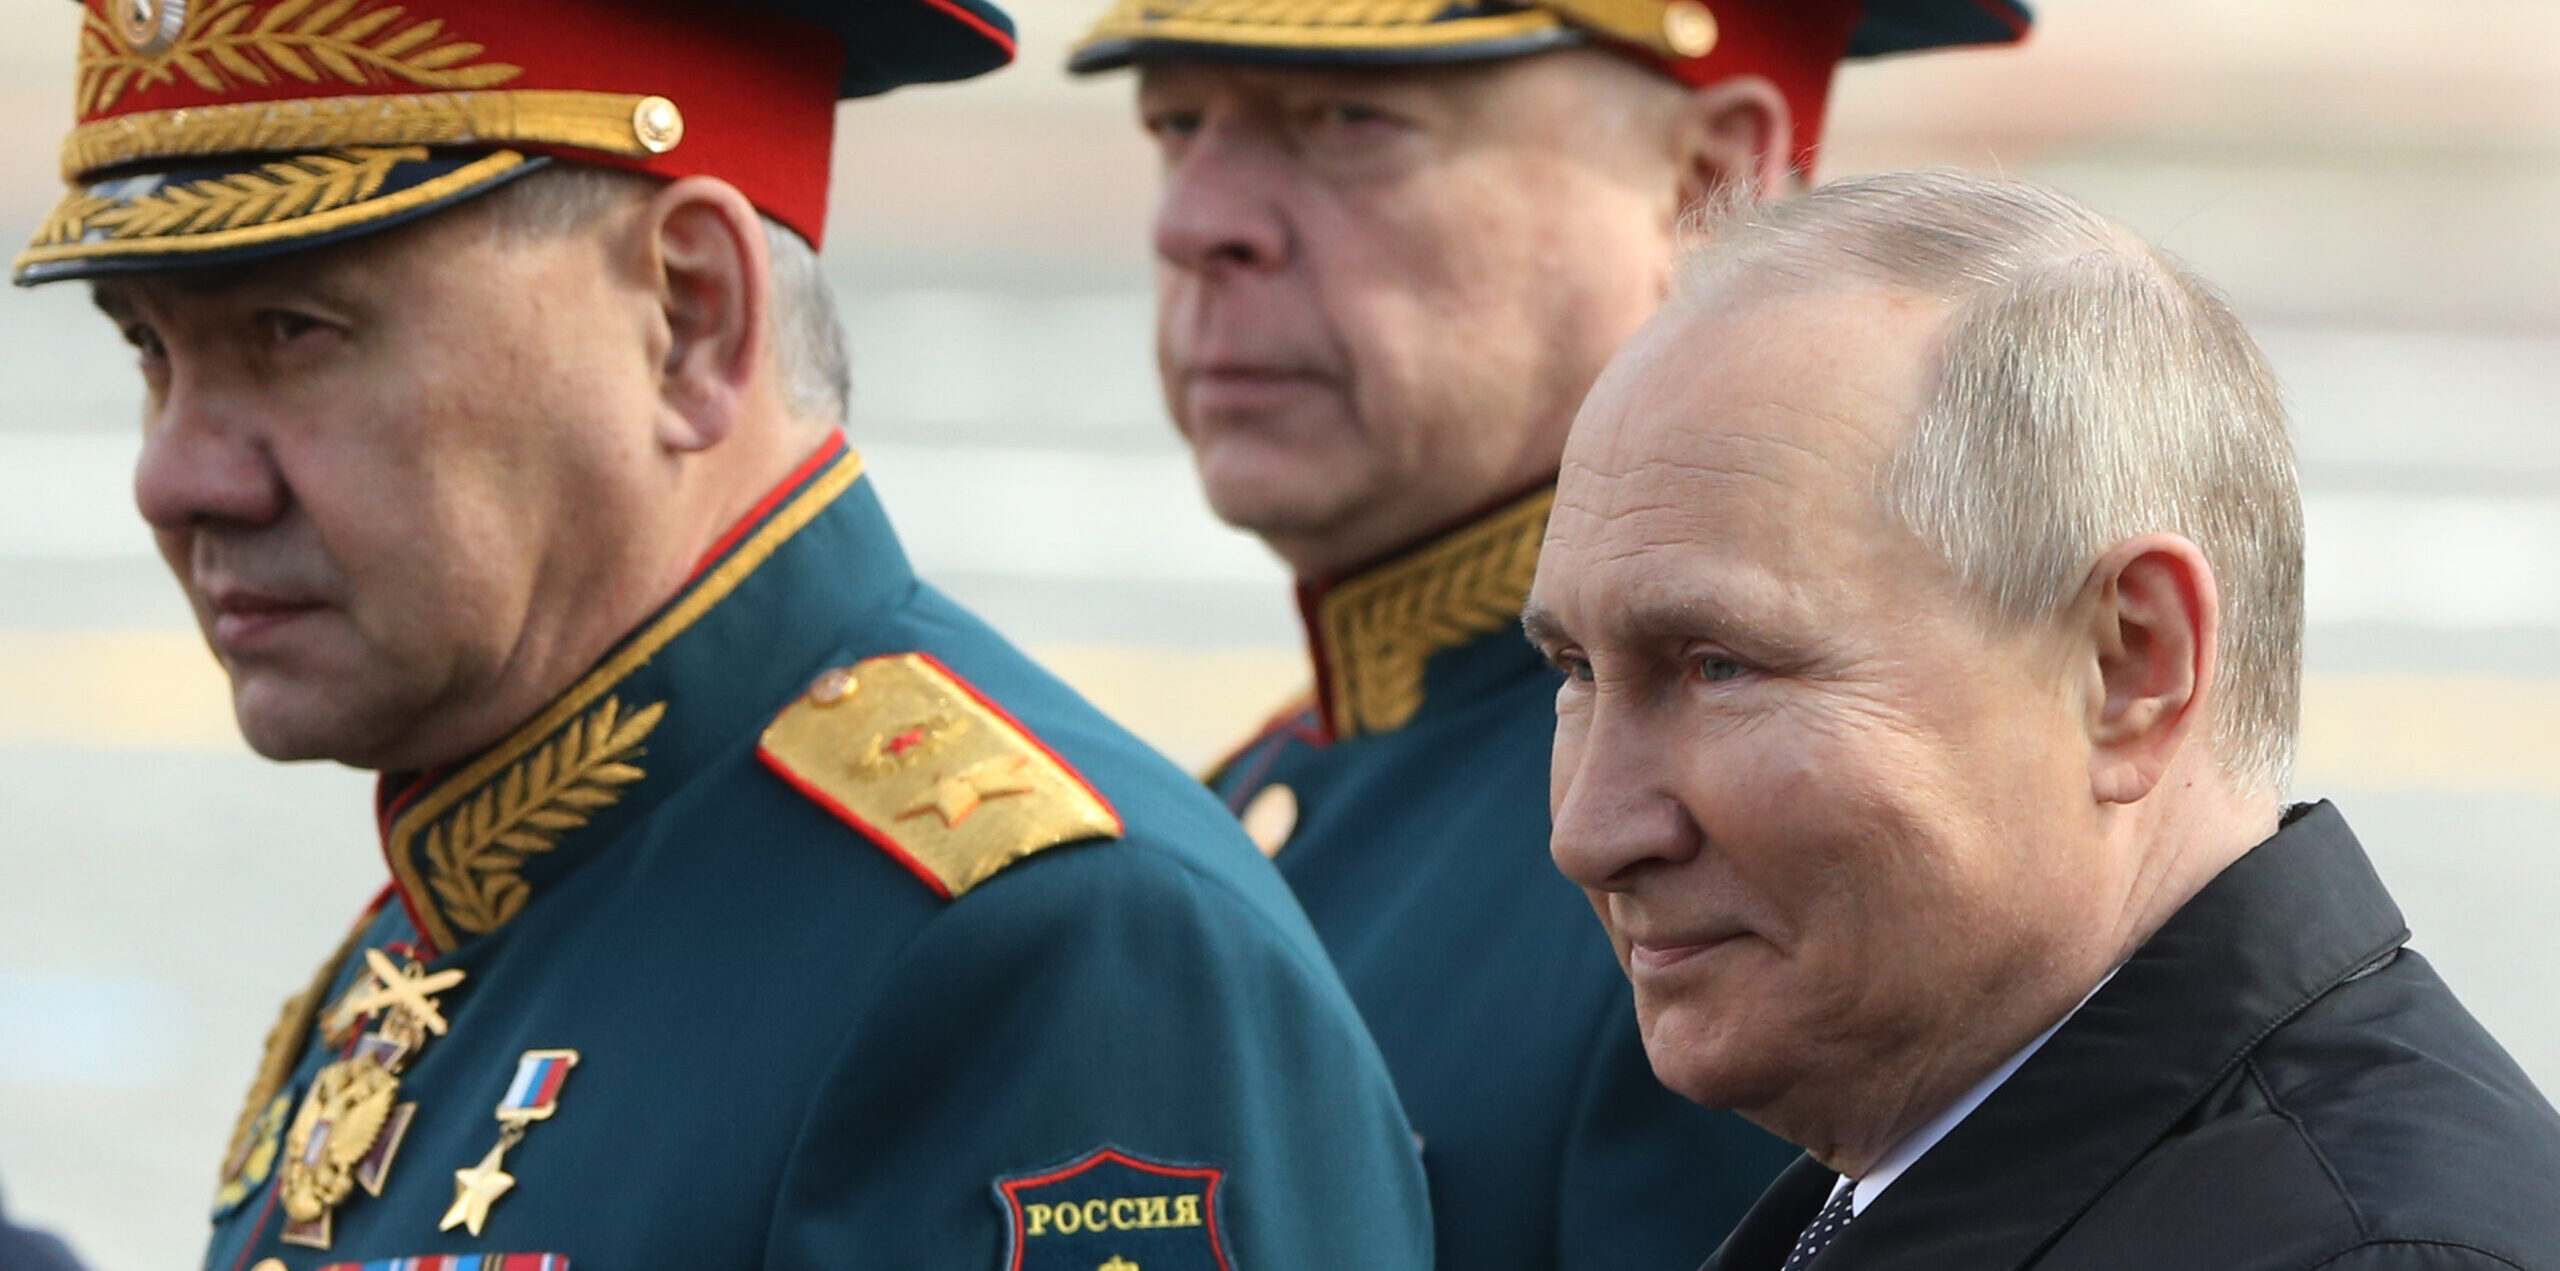 Armies and Autocrats: Why Putin's Military Failed | Journal of Democracy